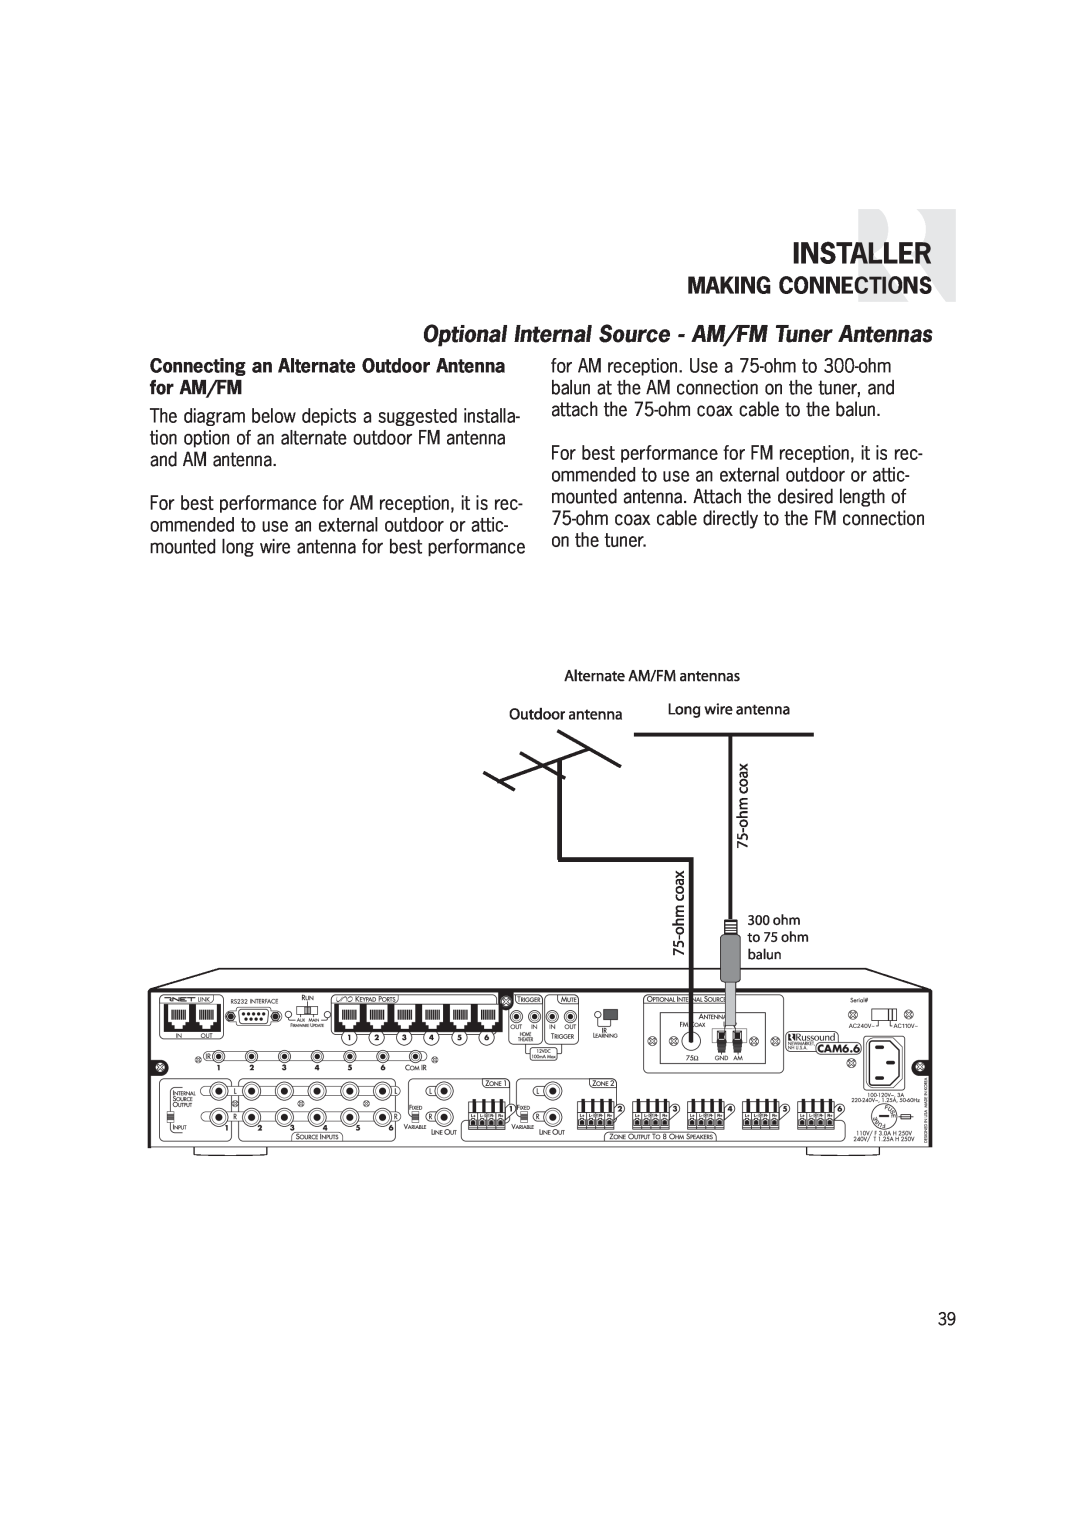 Russound CAM6.6T-S1 instruction manual Installer, Making Connections, Optional Internal Source - AM/FM Tuner Antennas 